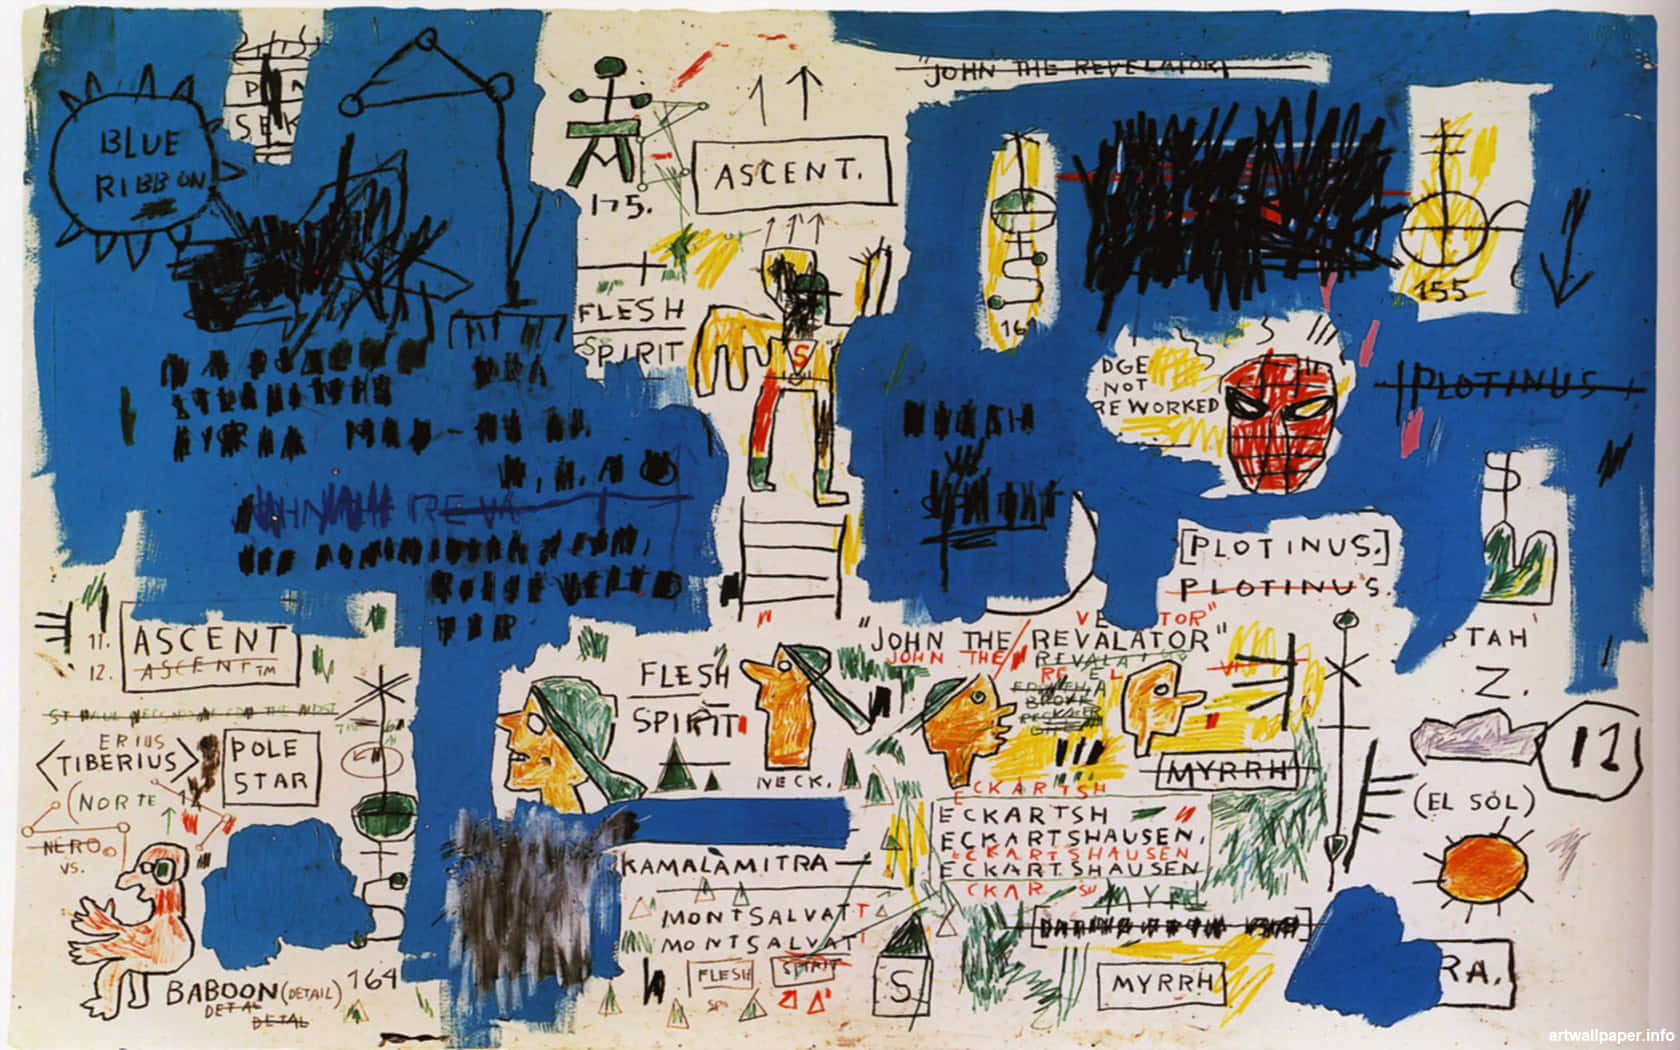 Download JeanMichel Basquiat, a Prolific and Influential Artist